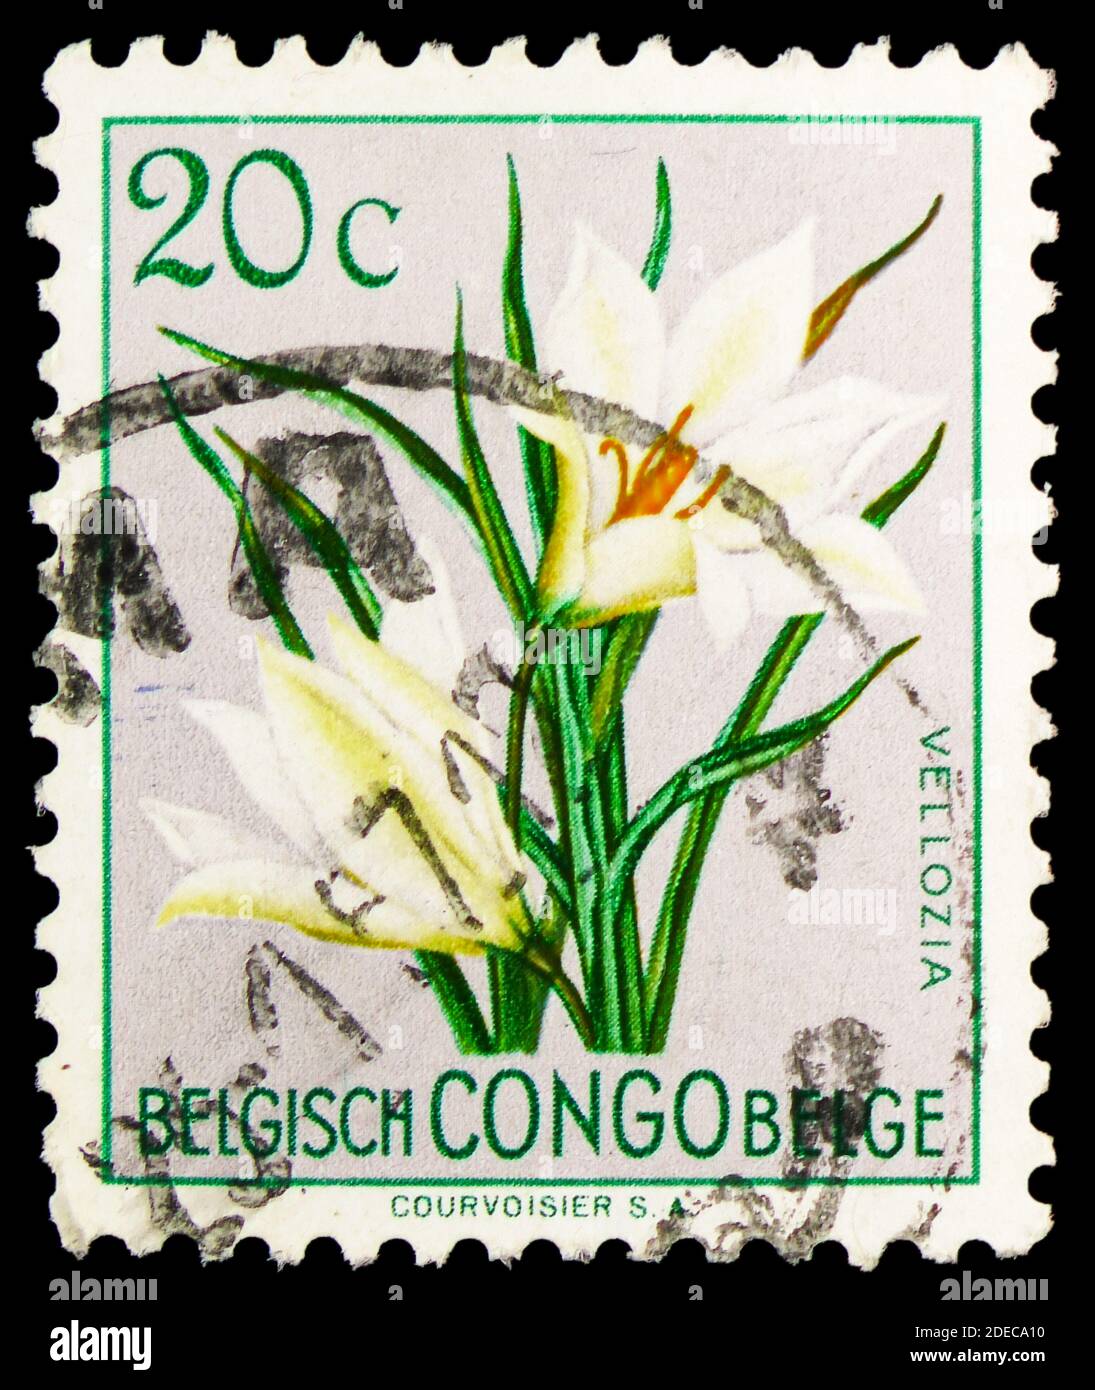 MOSCOW, RUSSIA - OCTOBER 17, 2020: Postage stamp printed in Belgish Congo shows Vellozia aequatorialis, Flowers serie, circa 1952 Stock Photo